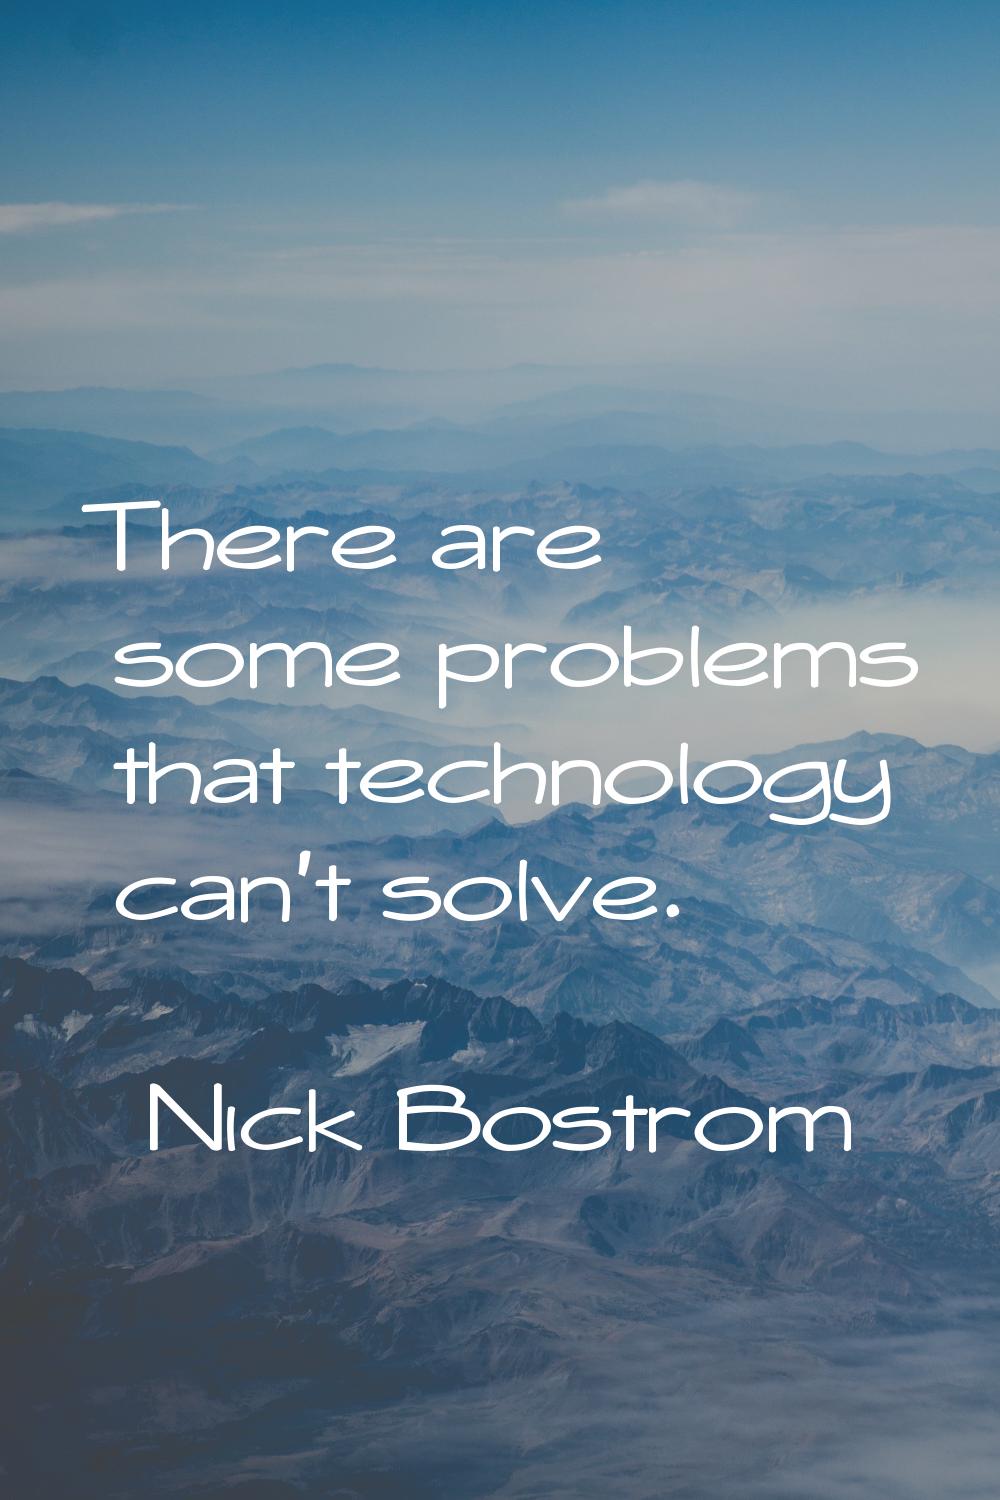 There are some problems that technology can't solve.